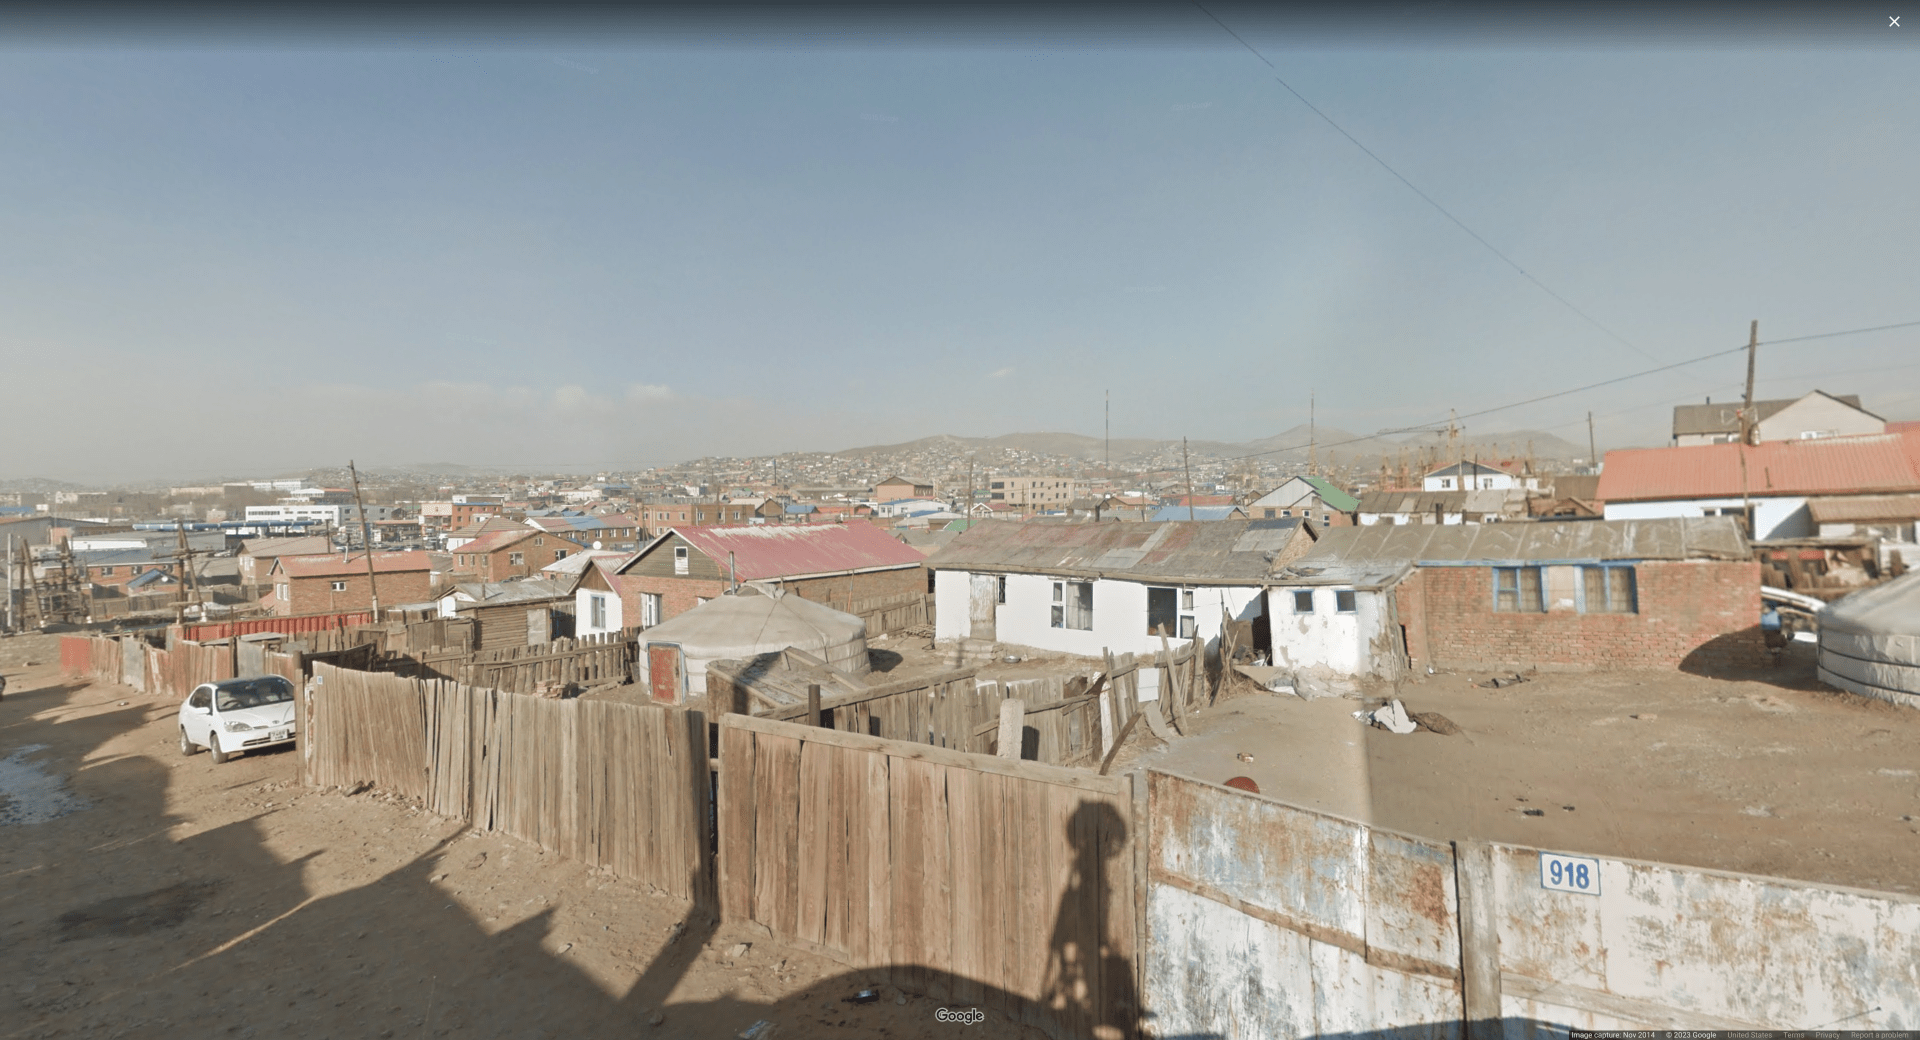 Picture of a giant neighborhood in a brushland/desert region, with wooden fences, roofs, and electric poles